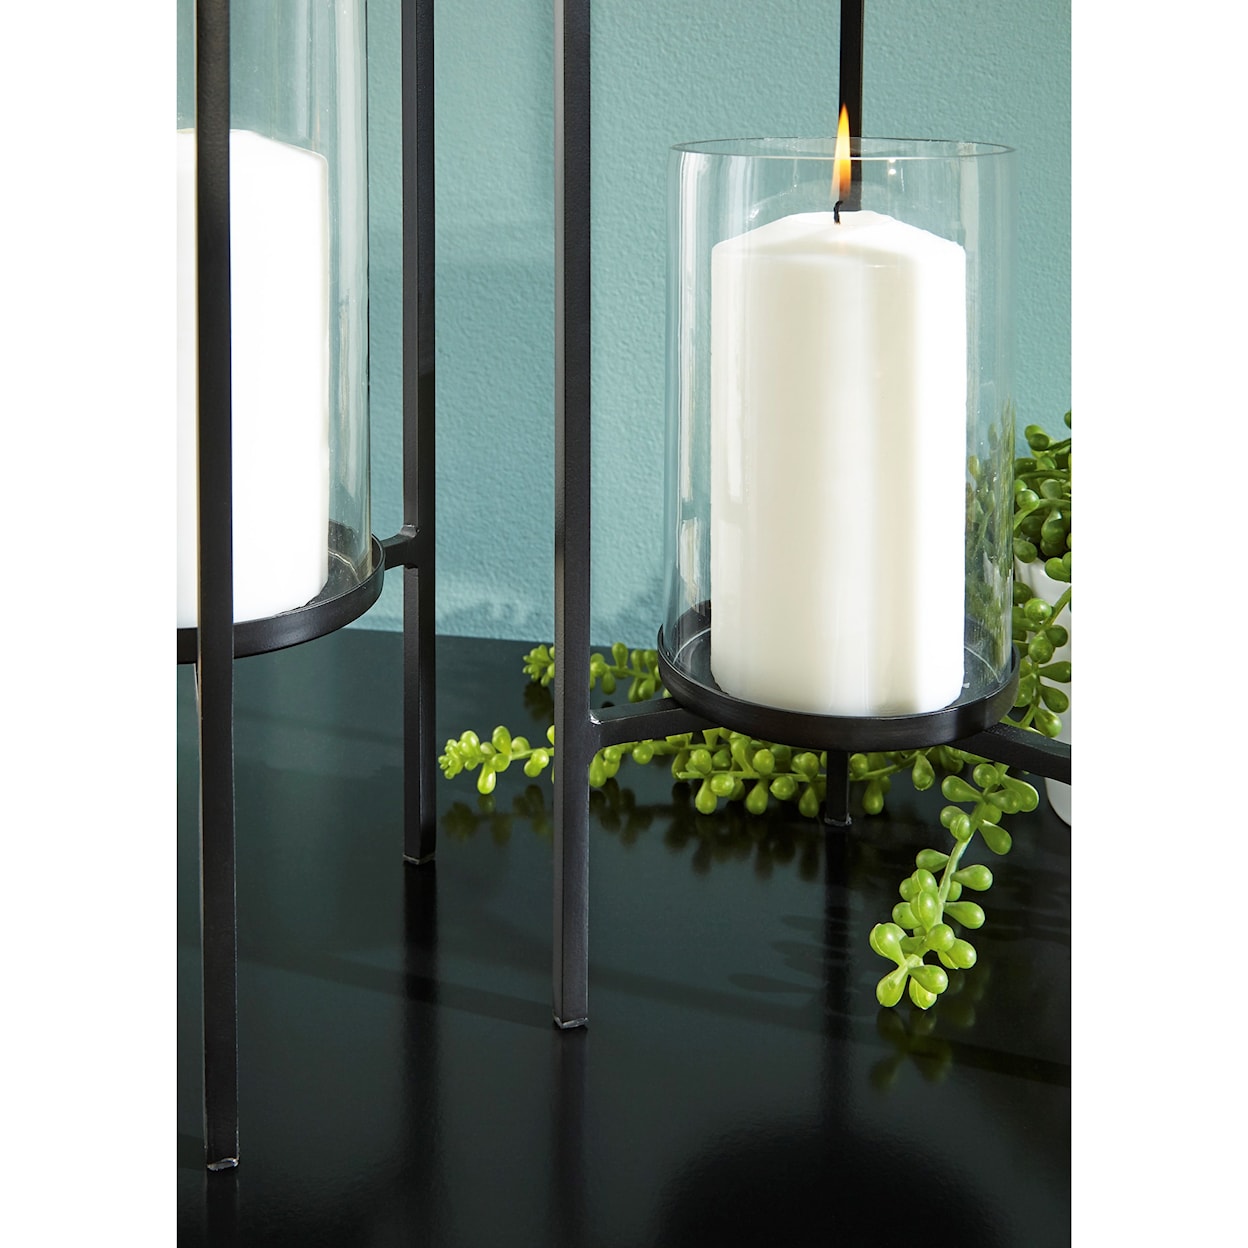 Signature Accents Ginette Candle Holder (Set of 2)